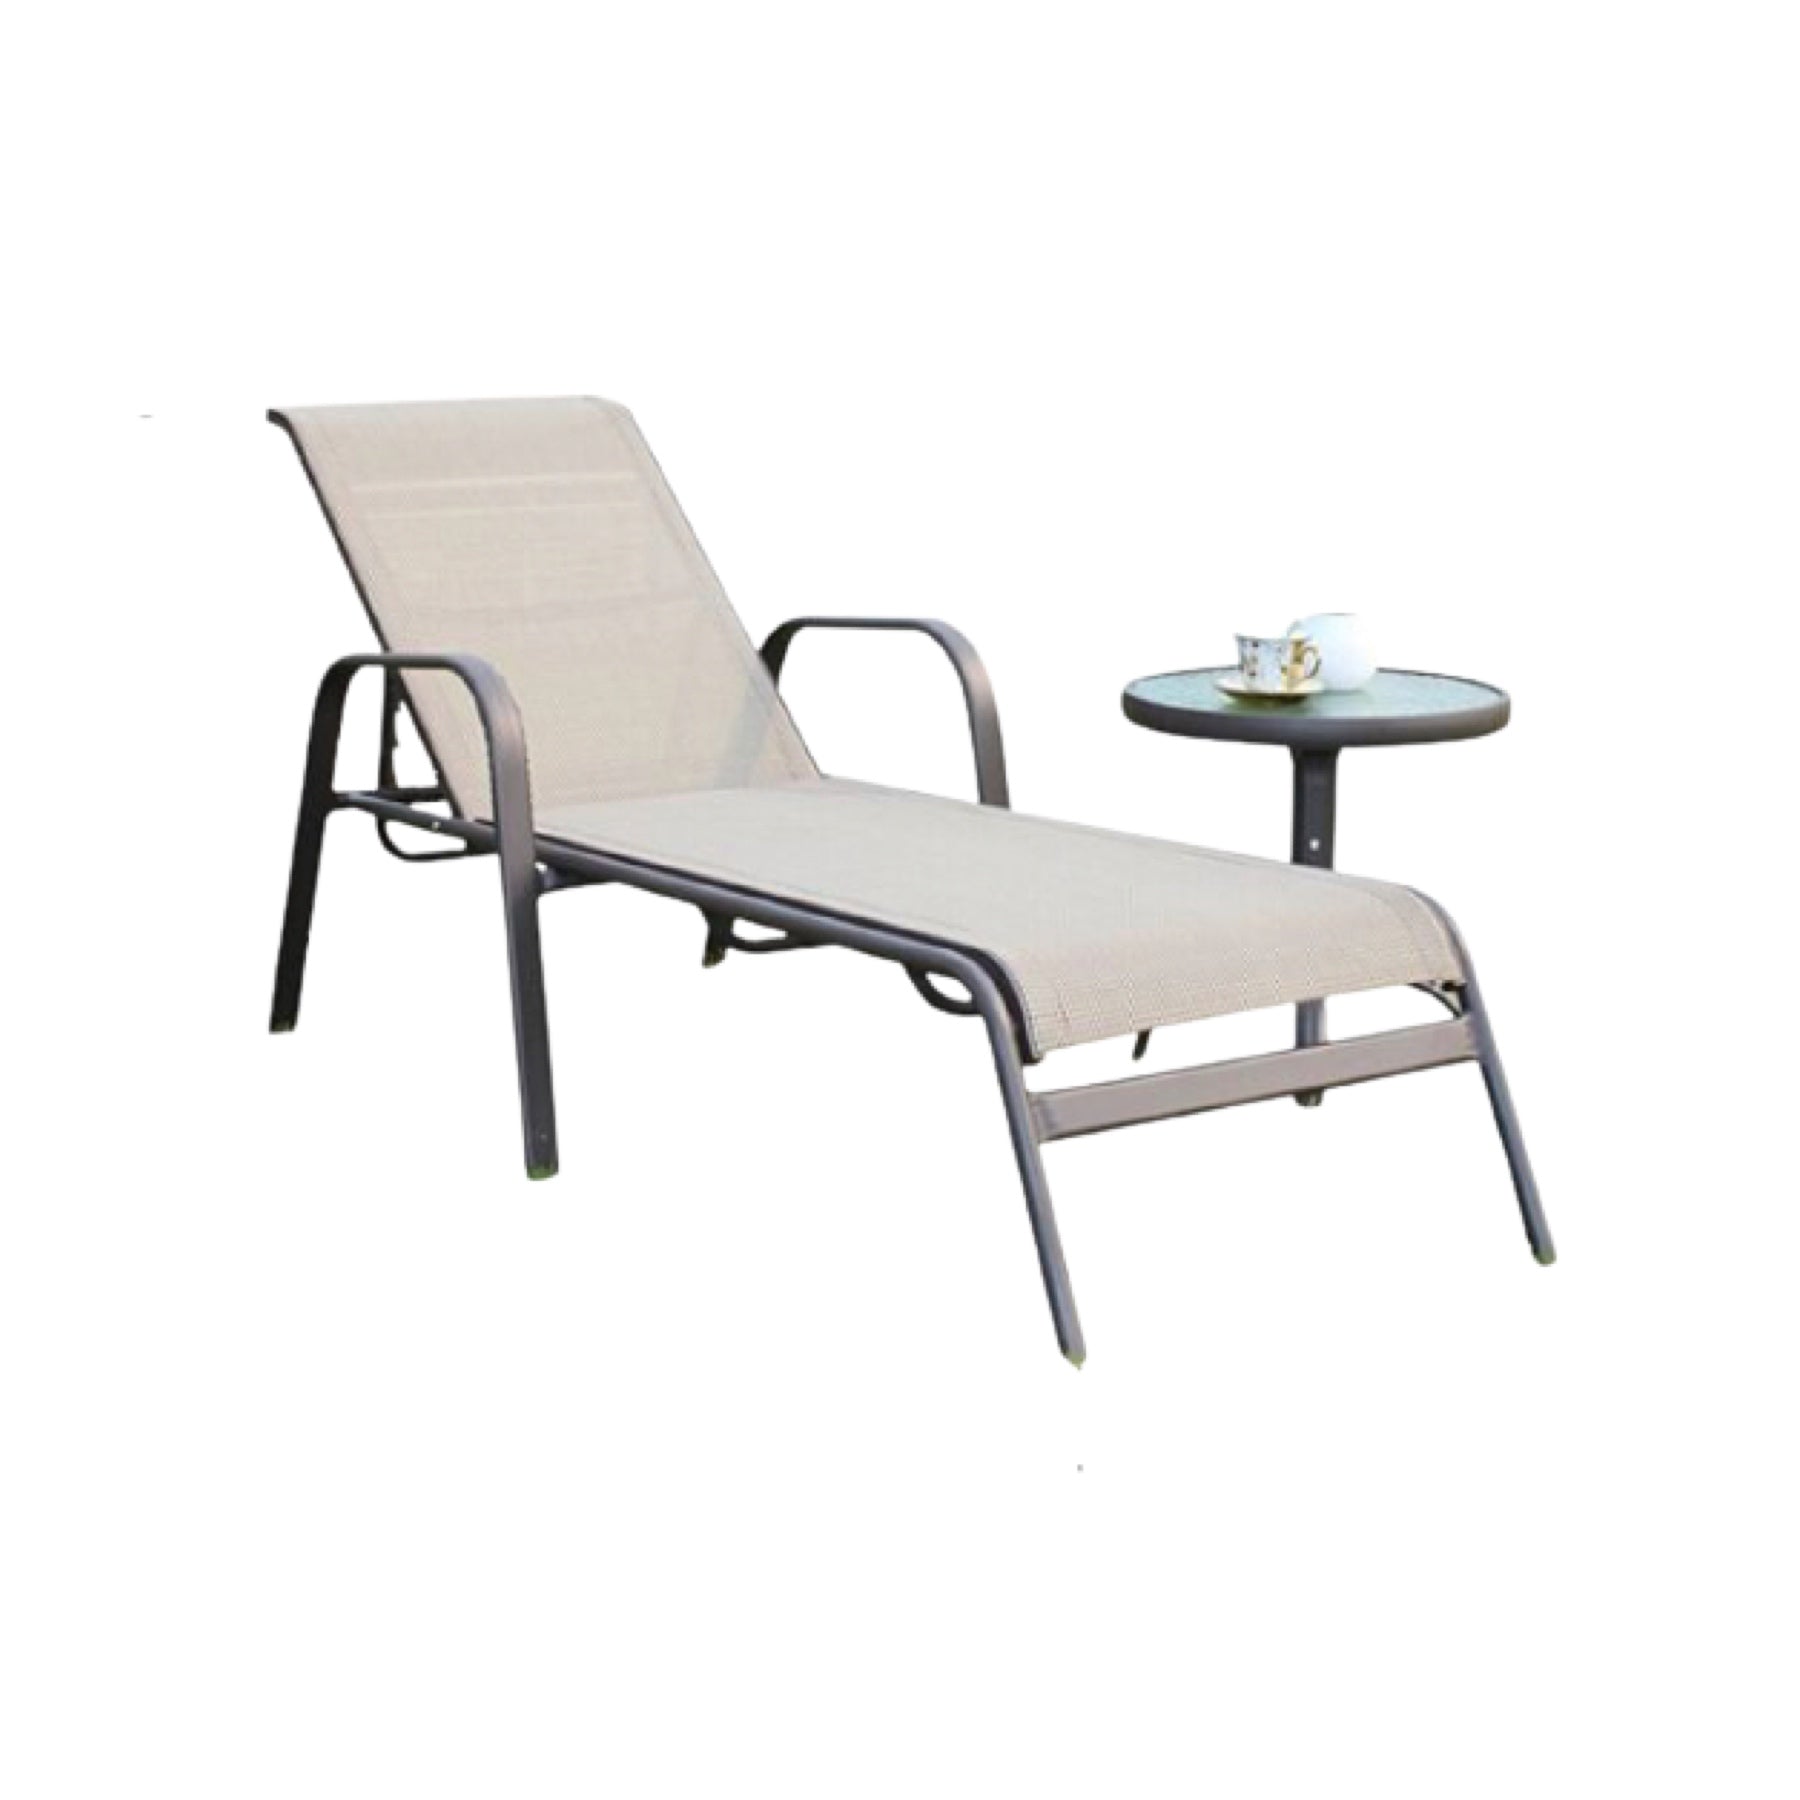 TR12009 Tenby Sunlounger and Side table